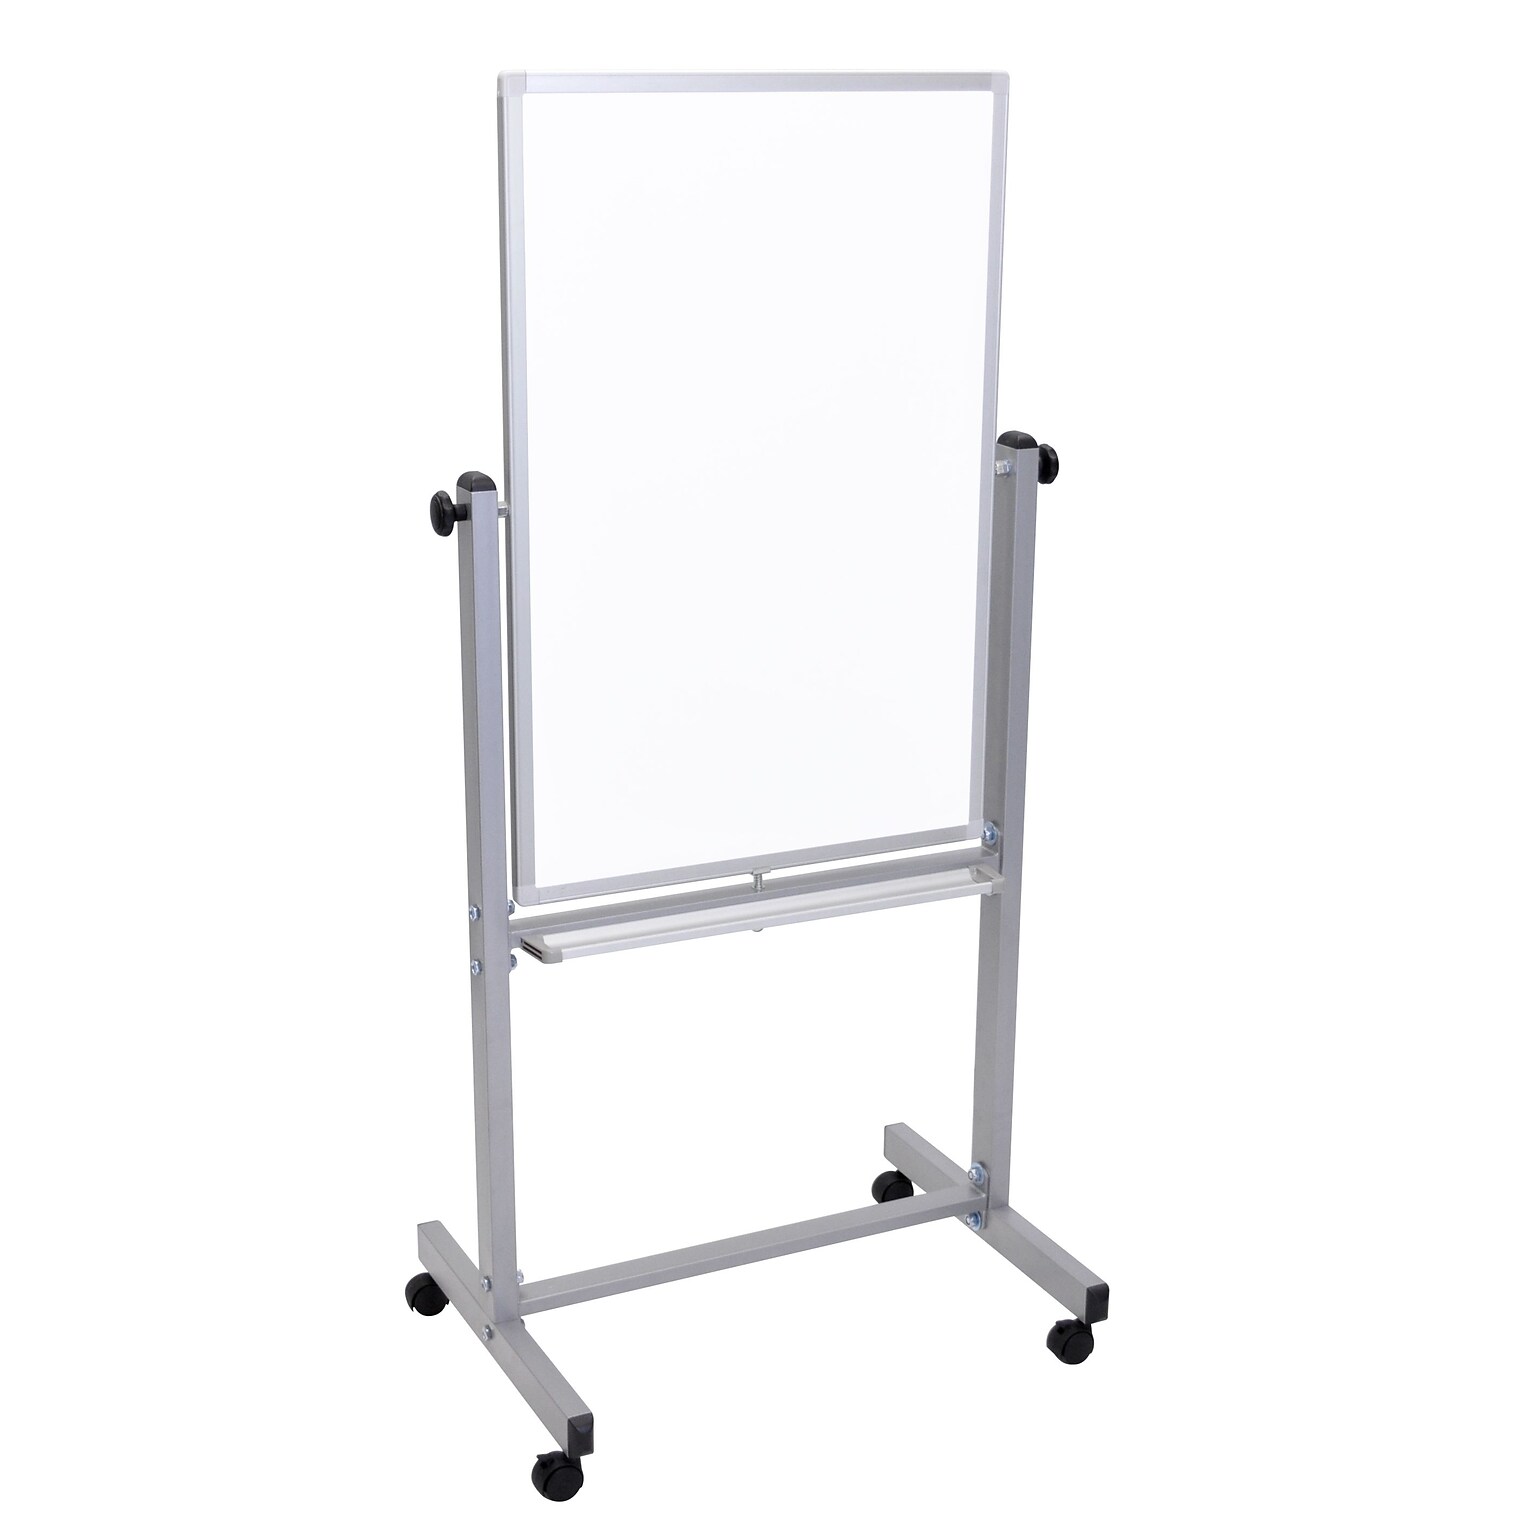 Luxor® Double Sided Magnetic Whiteboard; Aluminum Frame, 24 x 36 (L270)